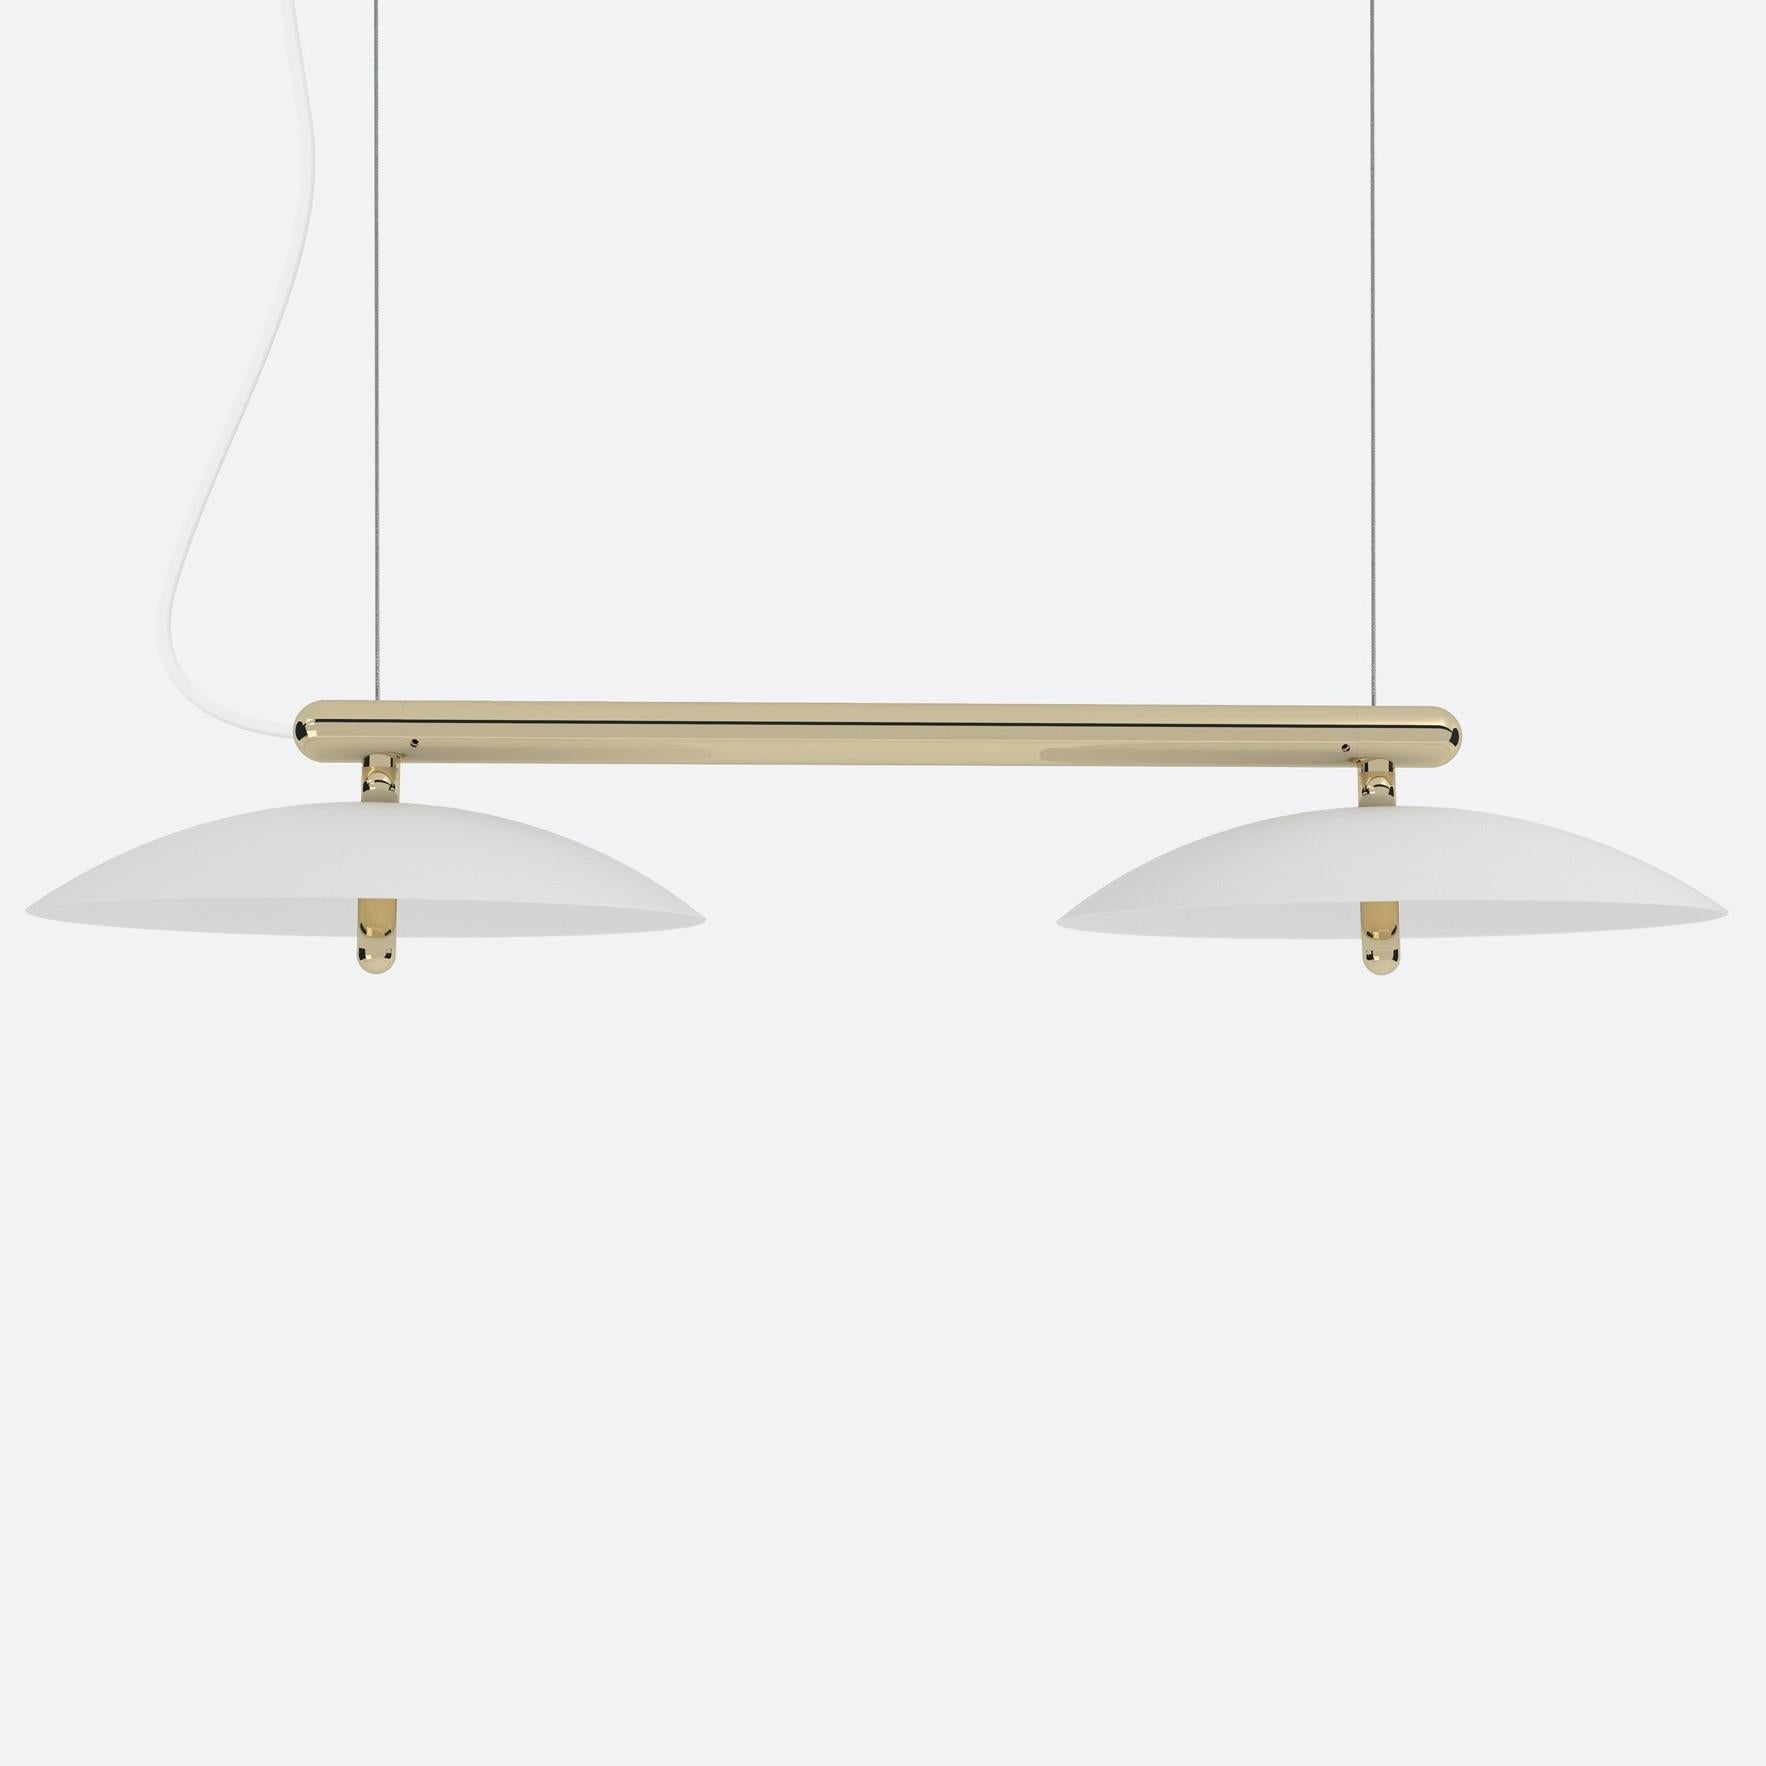 Price is for a signal linear pendant with white shade and brass accents. This piece is customizable so we can also make the finishes per order to your spec. 

Lamping: G8 LED Bulbs (included)
Canopy: White, 5in Diameter, .25in height
4x G8 LED bulbs